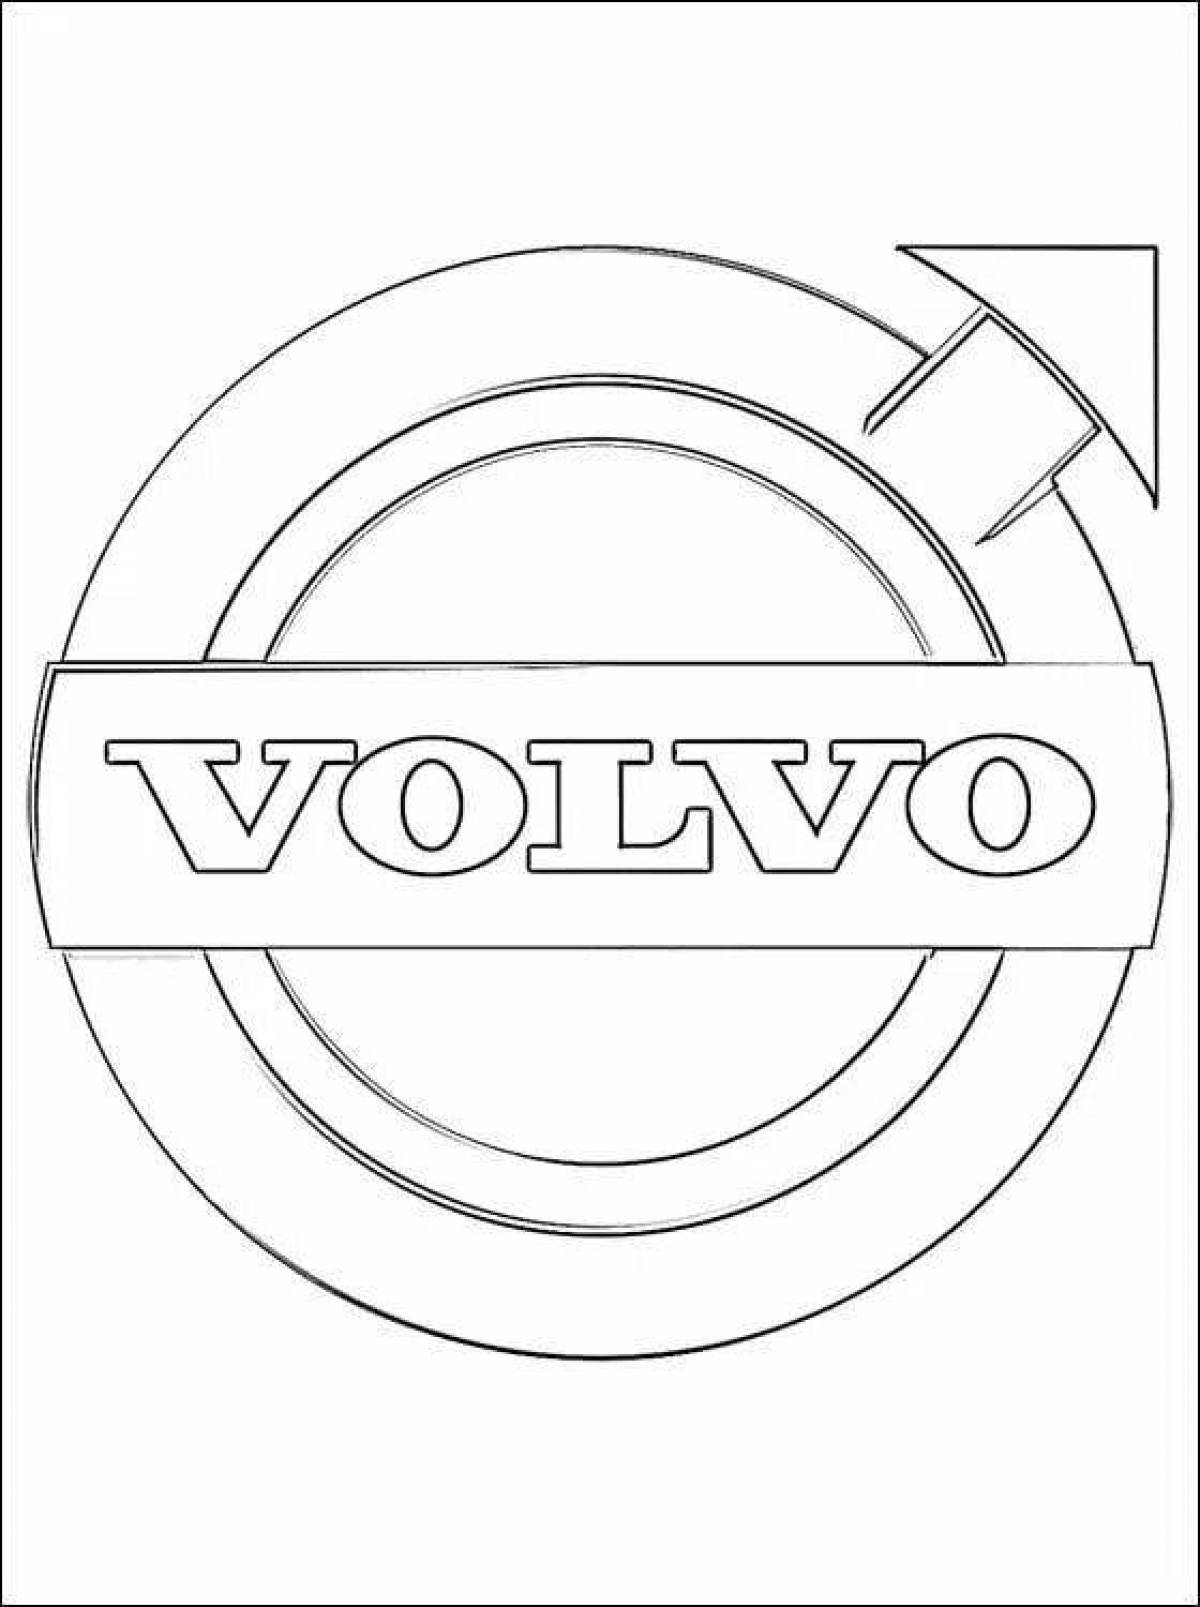 Coloring page with the joyful car logo